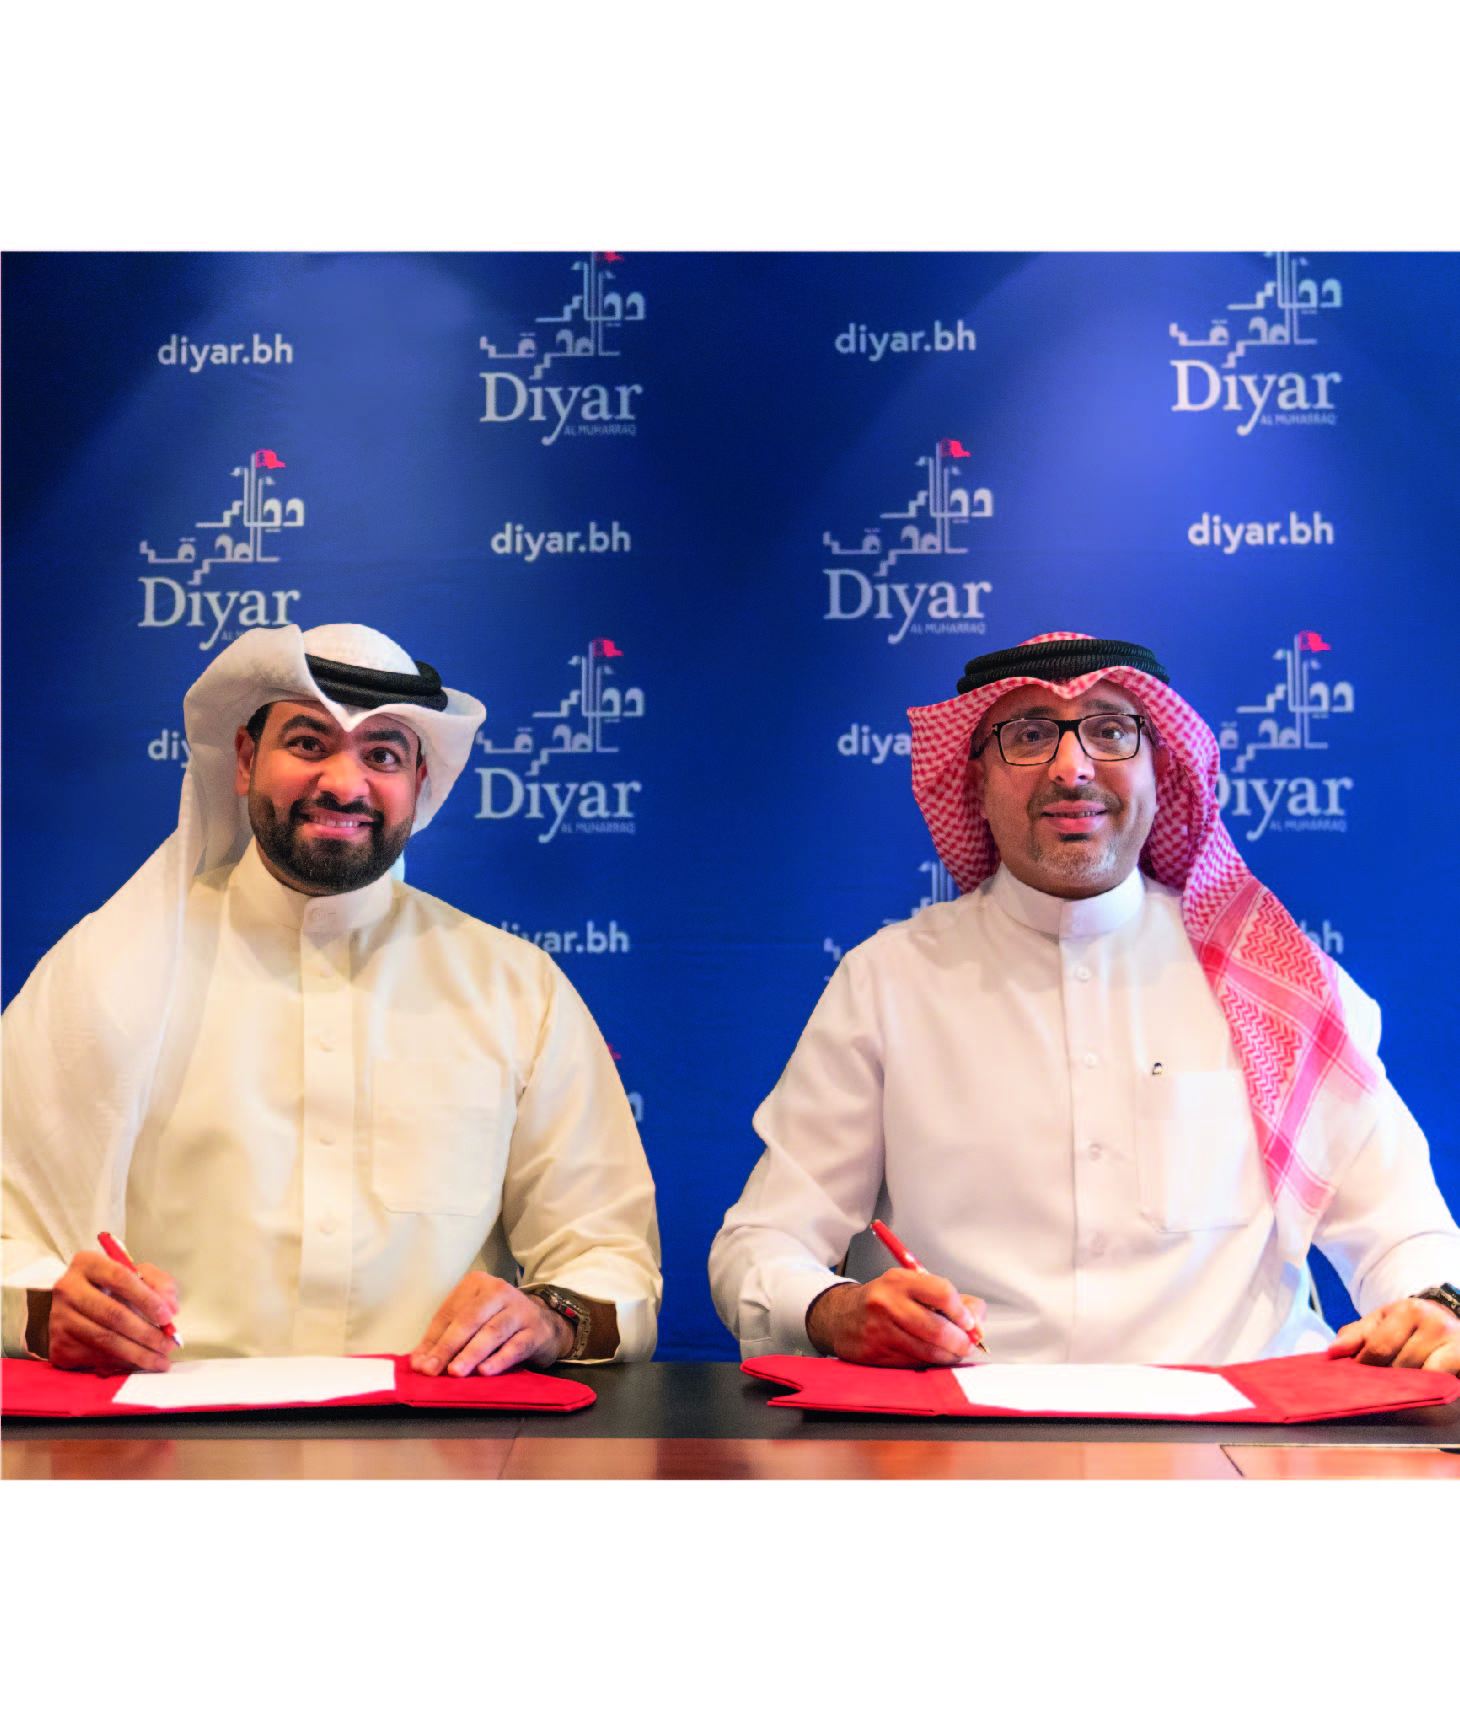 Diyar Al Muharraq Announces its Sponsorship of the First Padel Tournament in the Kingdom of Bahrain